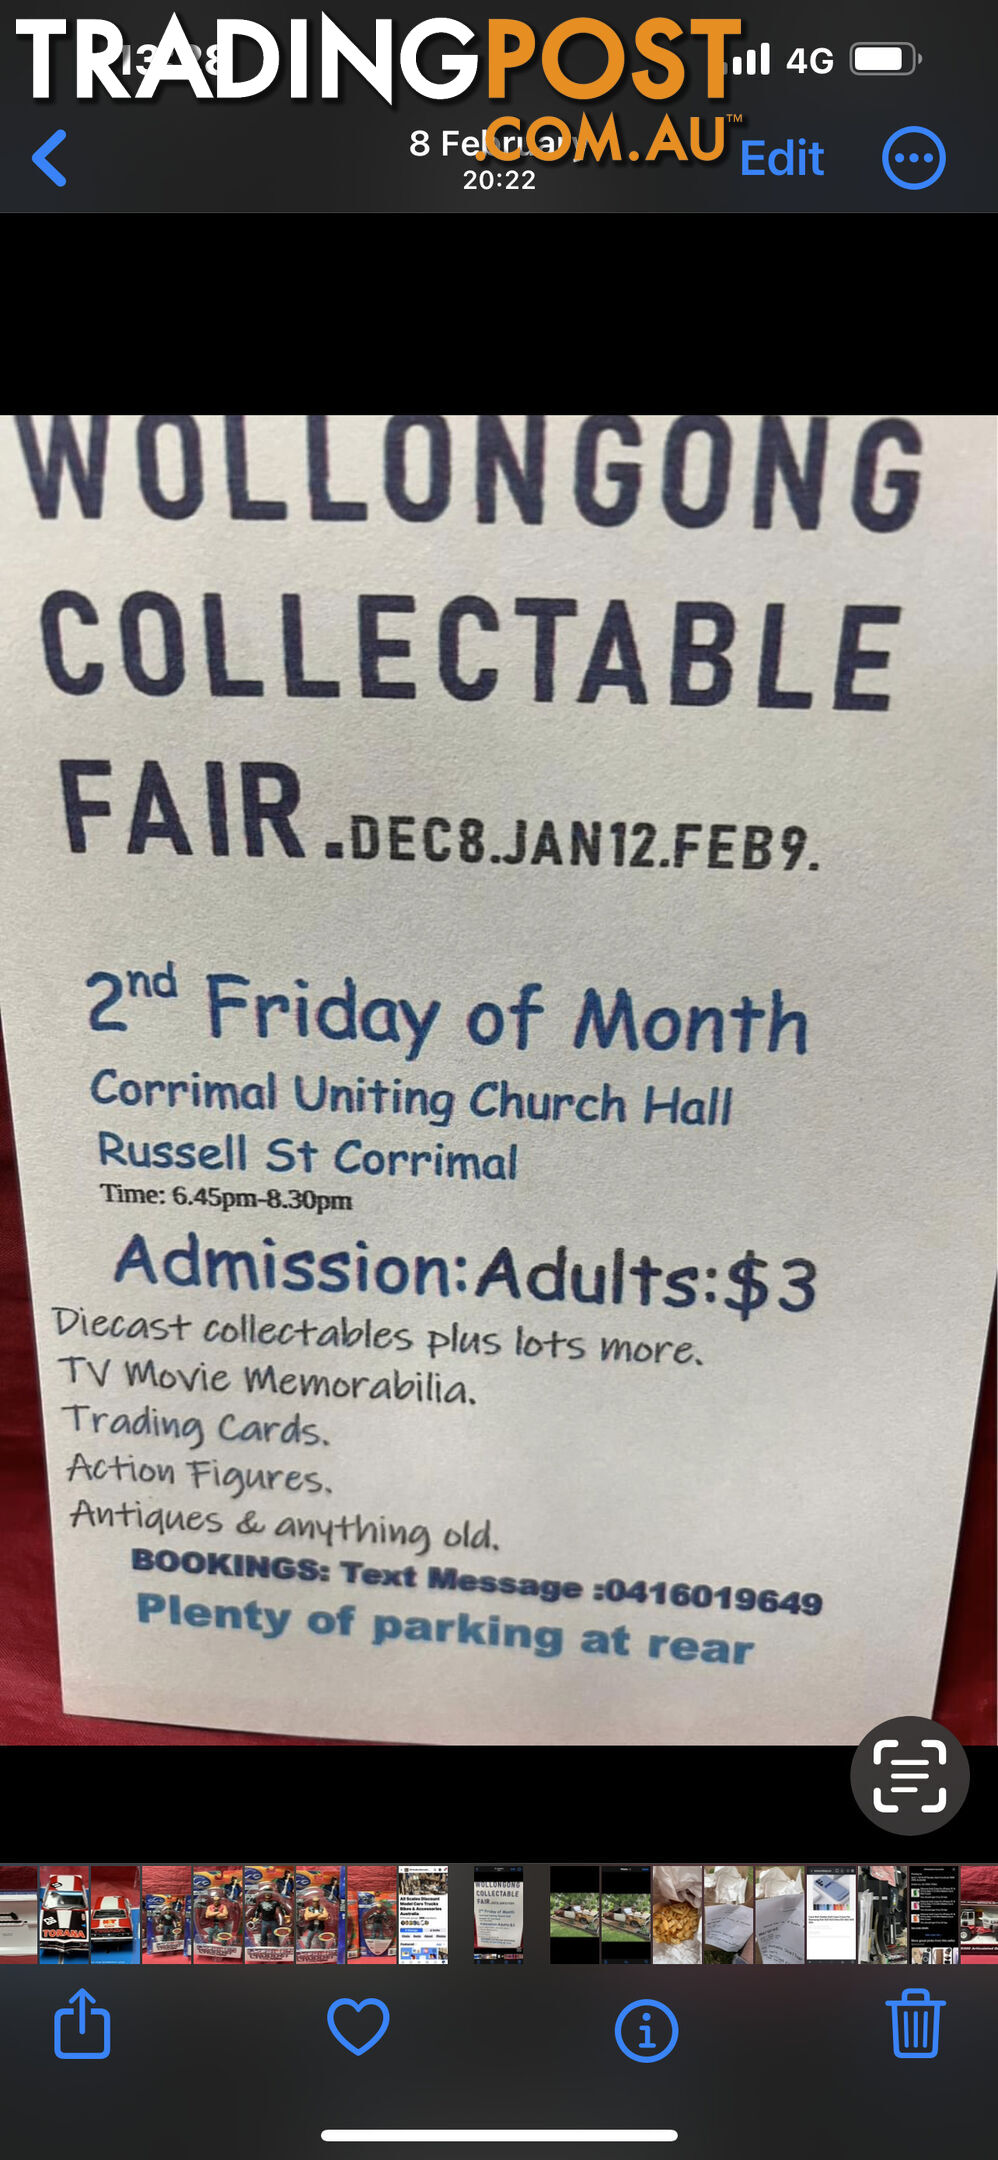 Wollongong Collectable Fair every 2nd Friday Night of month